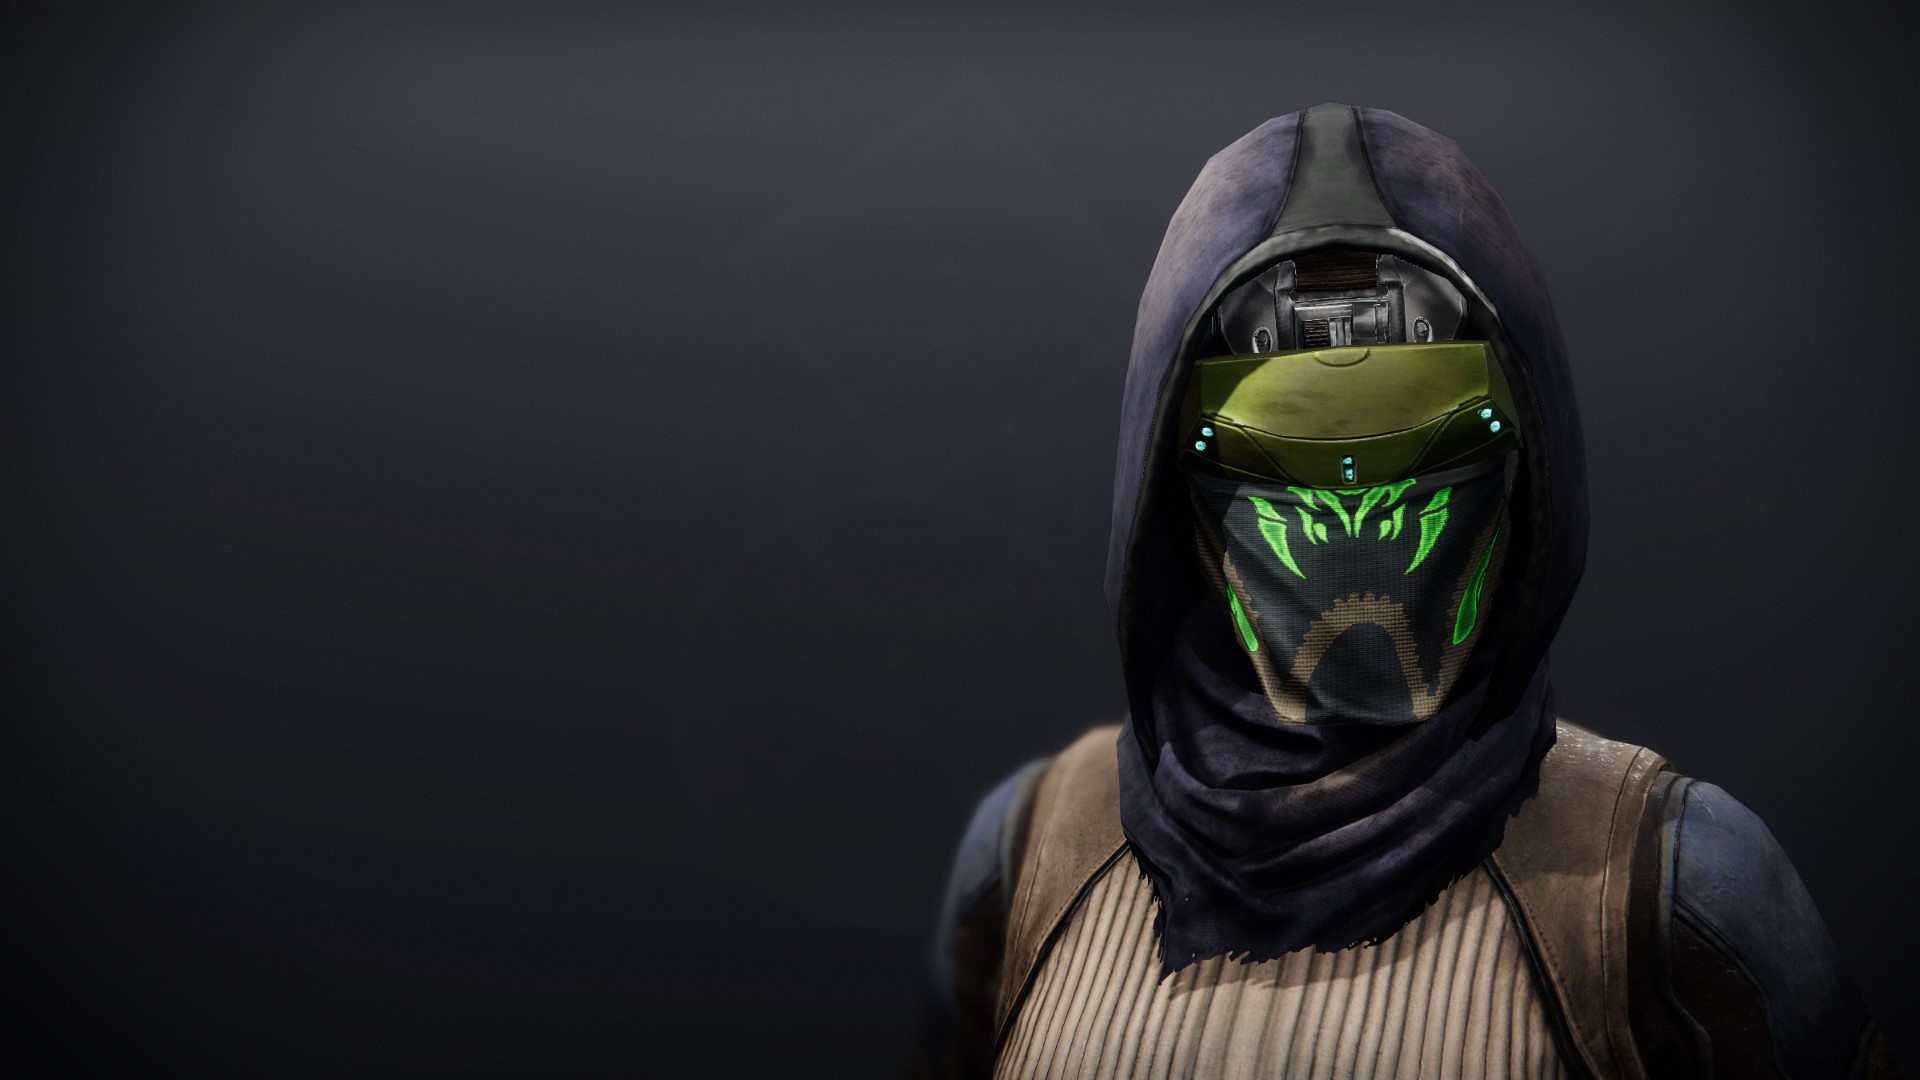 An in-game render of the Illicit Reaper Mask.